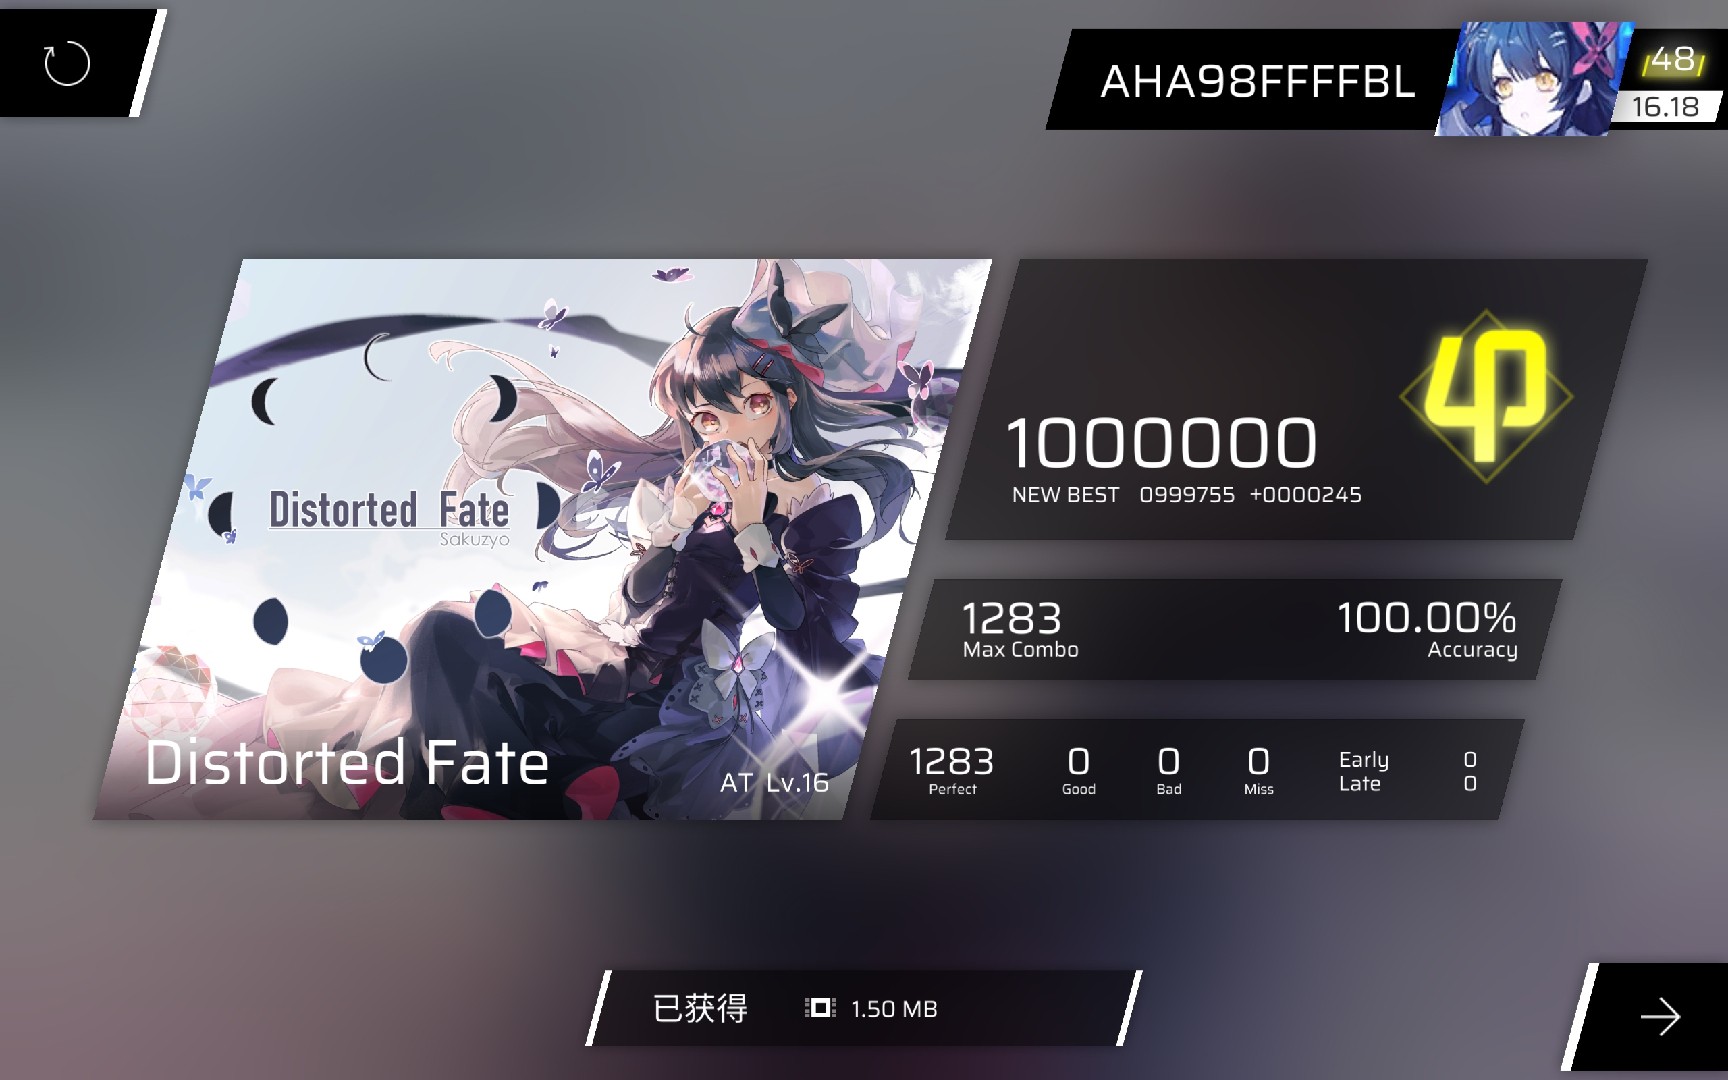 【Phigros/拇指全球首杀】Distorted Fate[AT16] 板拇ALL PERFECT！（辅助指使用）